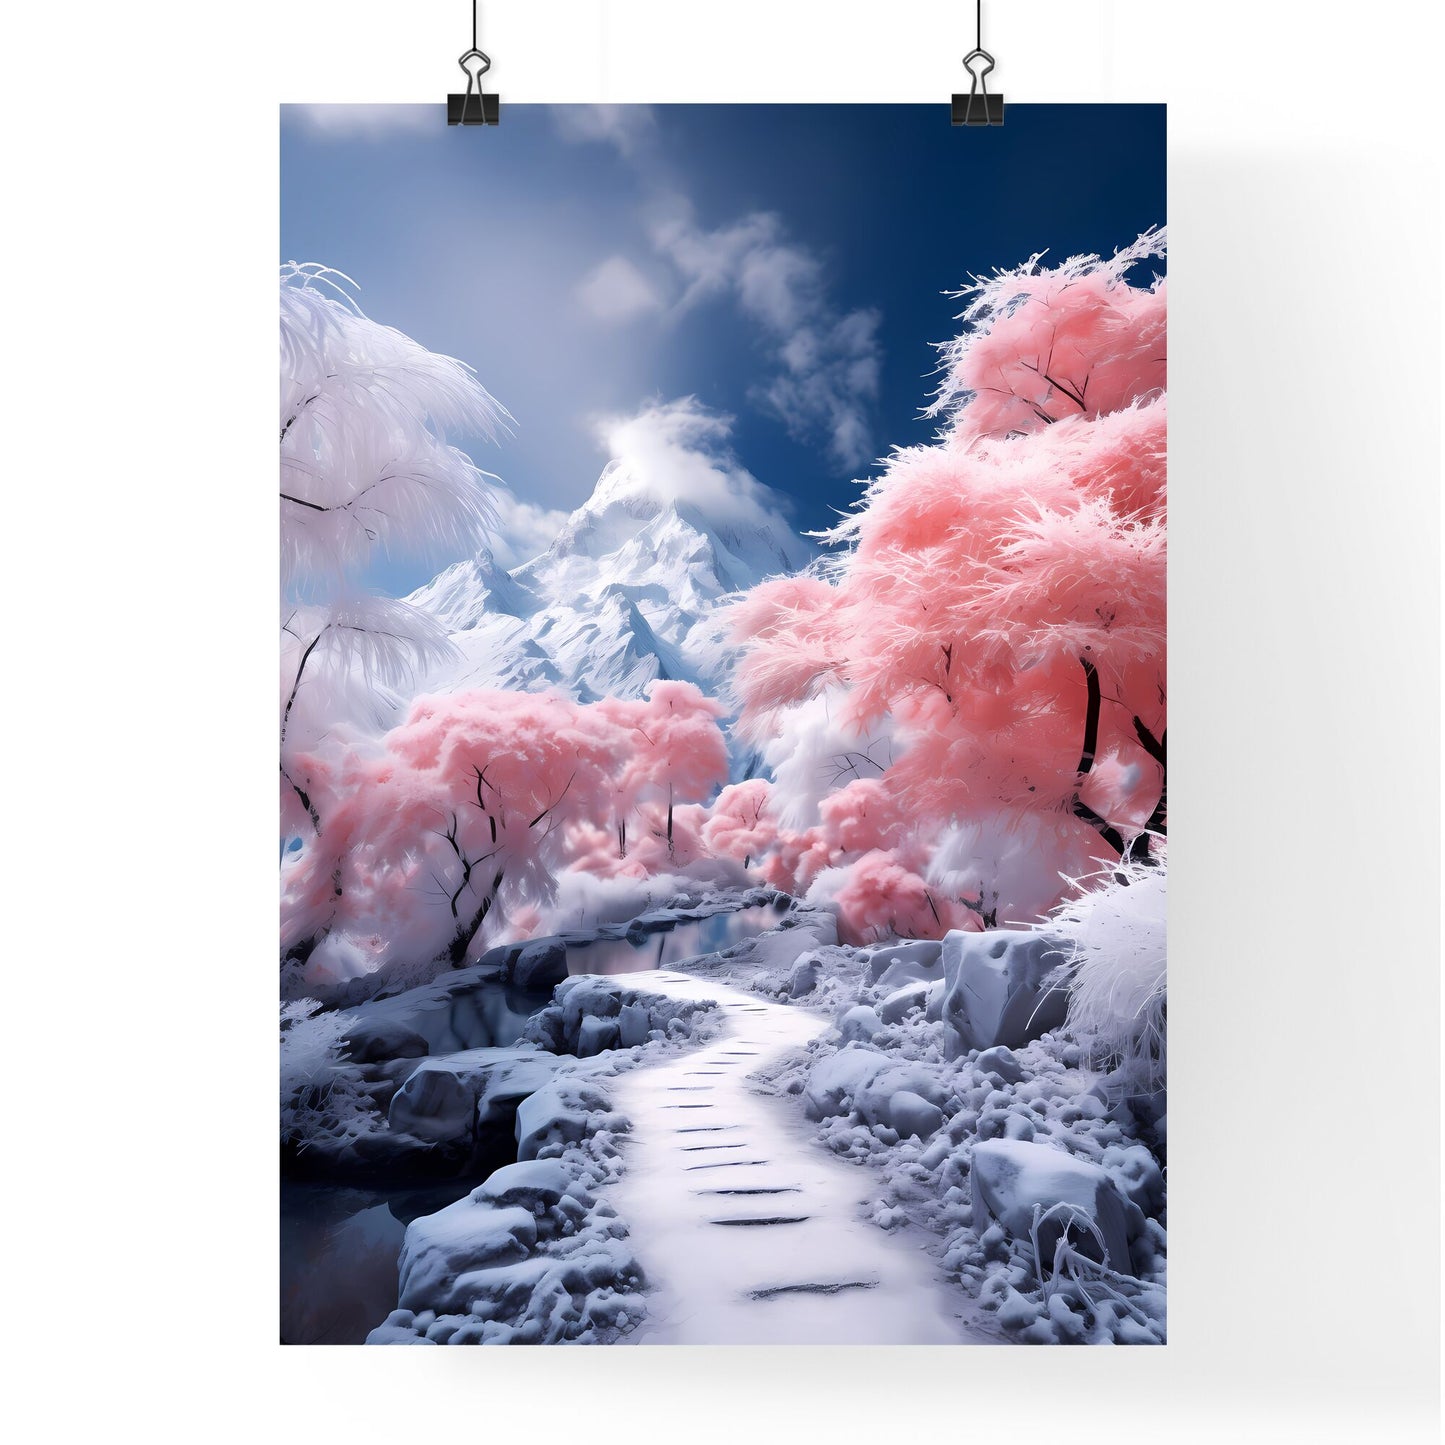 A Poster of A magnificent snow mountain - A Snowy Path Leading To A Mountain Default Title